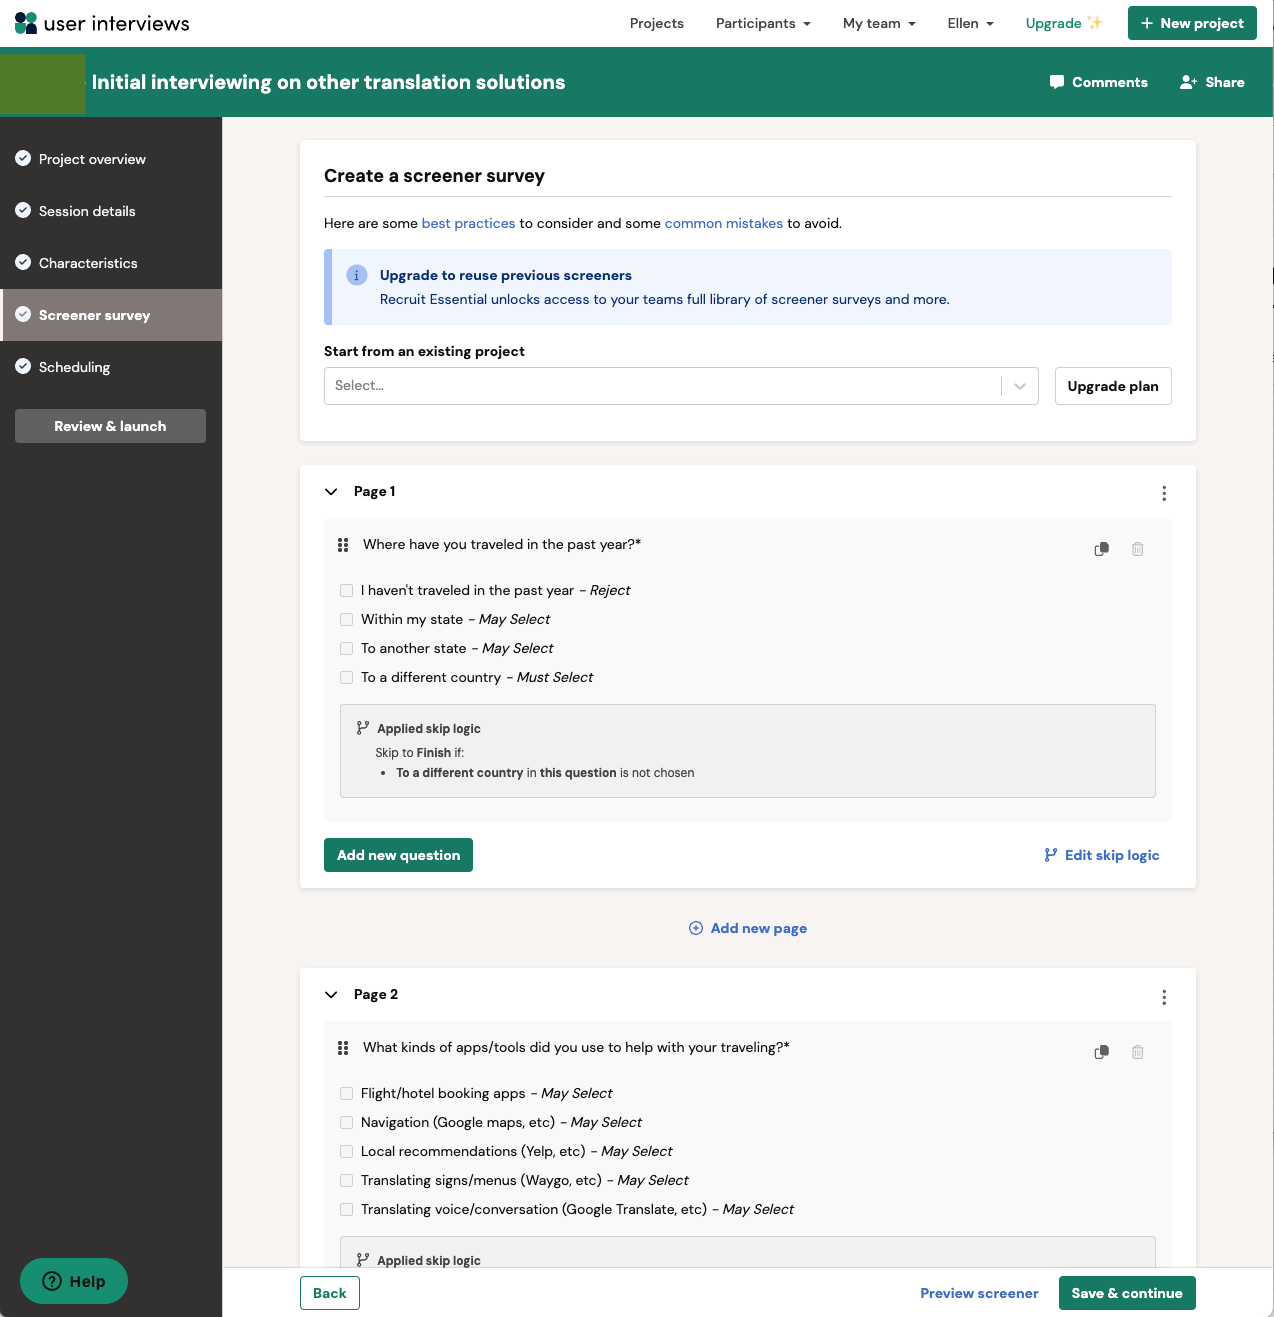 A screenshot of the screener survey interface in UserInterviews where you can add questions and logic for how you'd like to score answers.